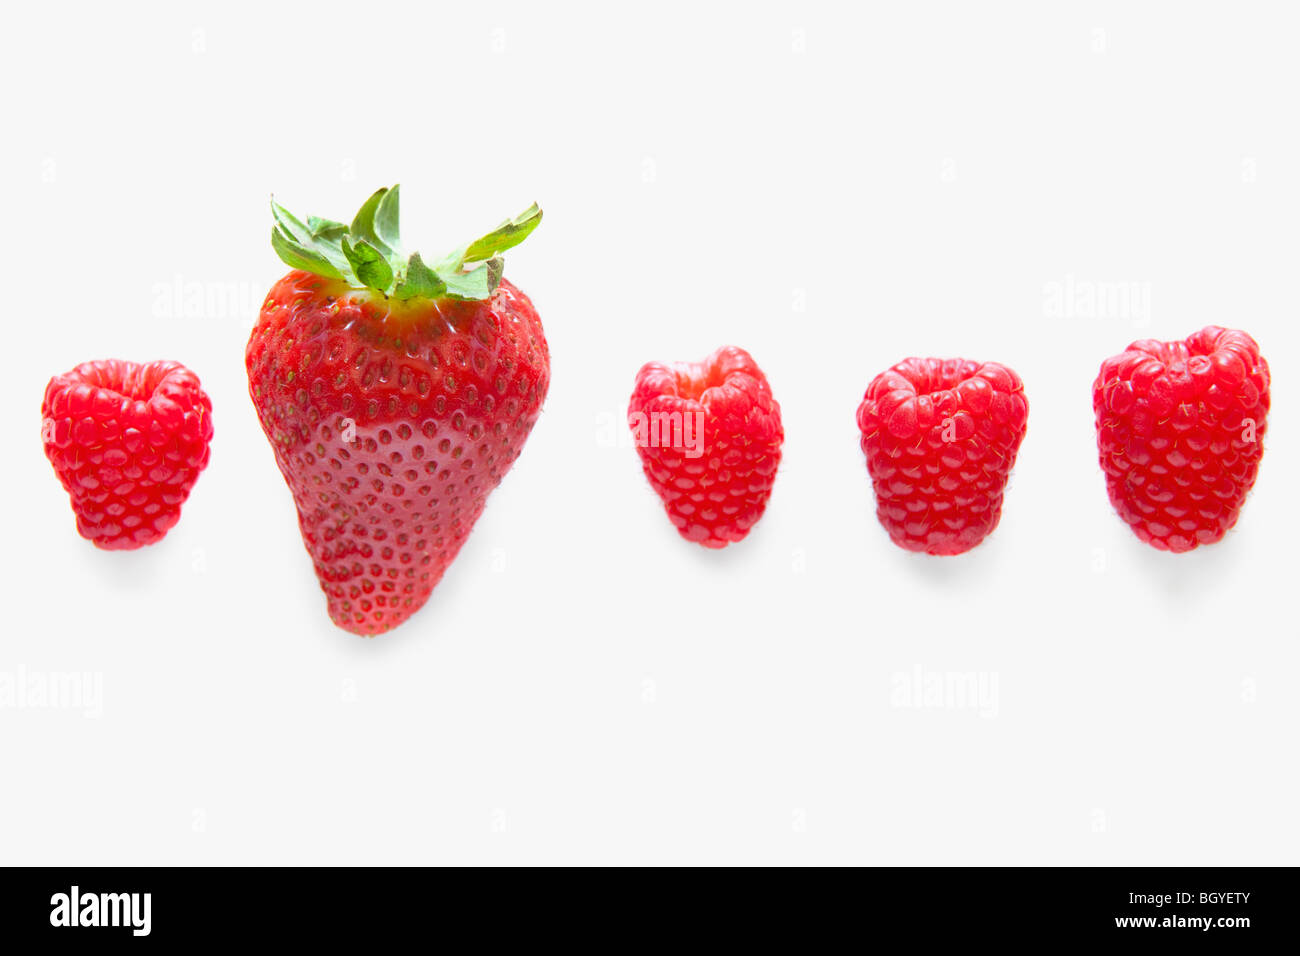 Four raspberries and one strawberry Stock Photo